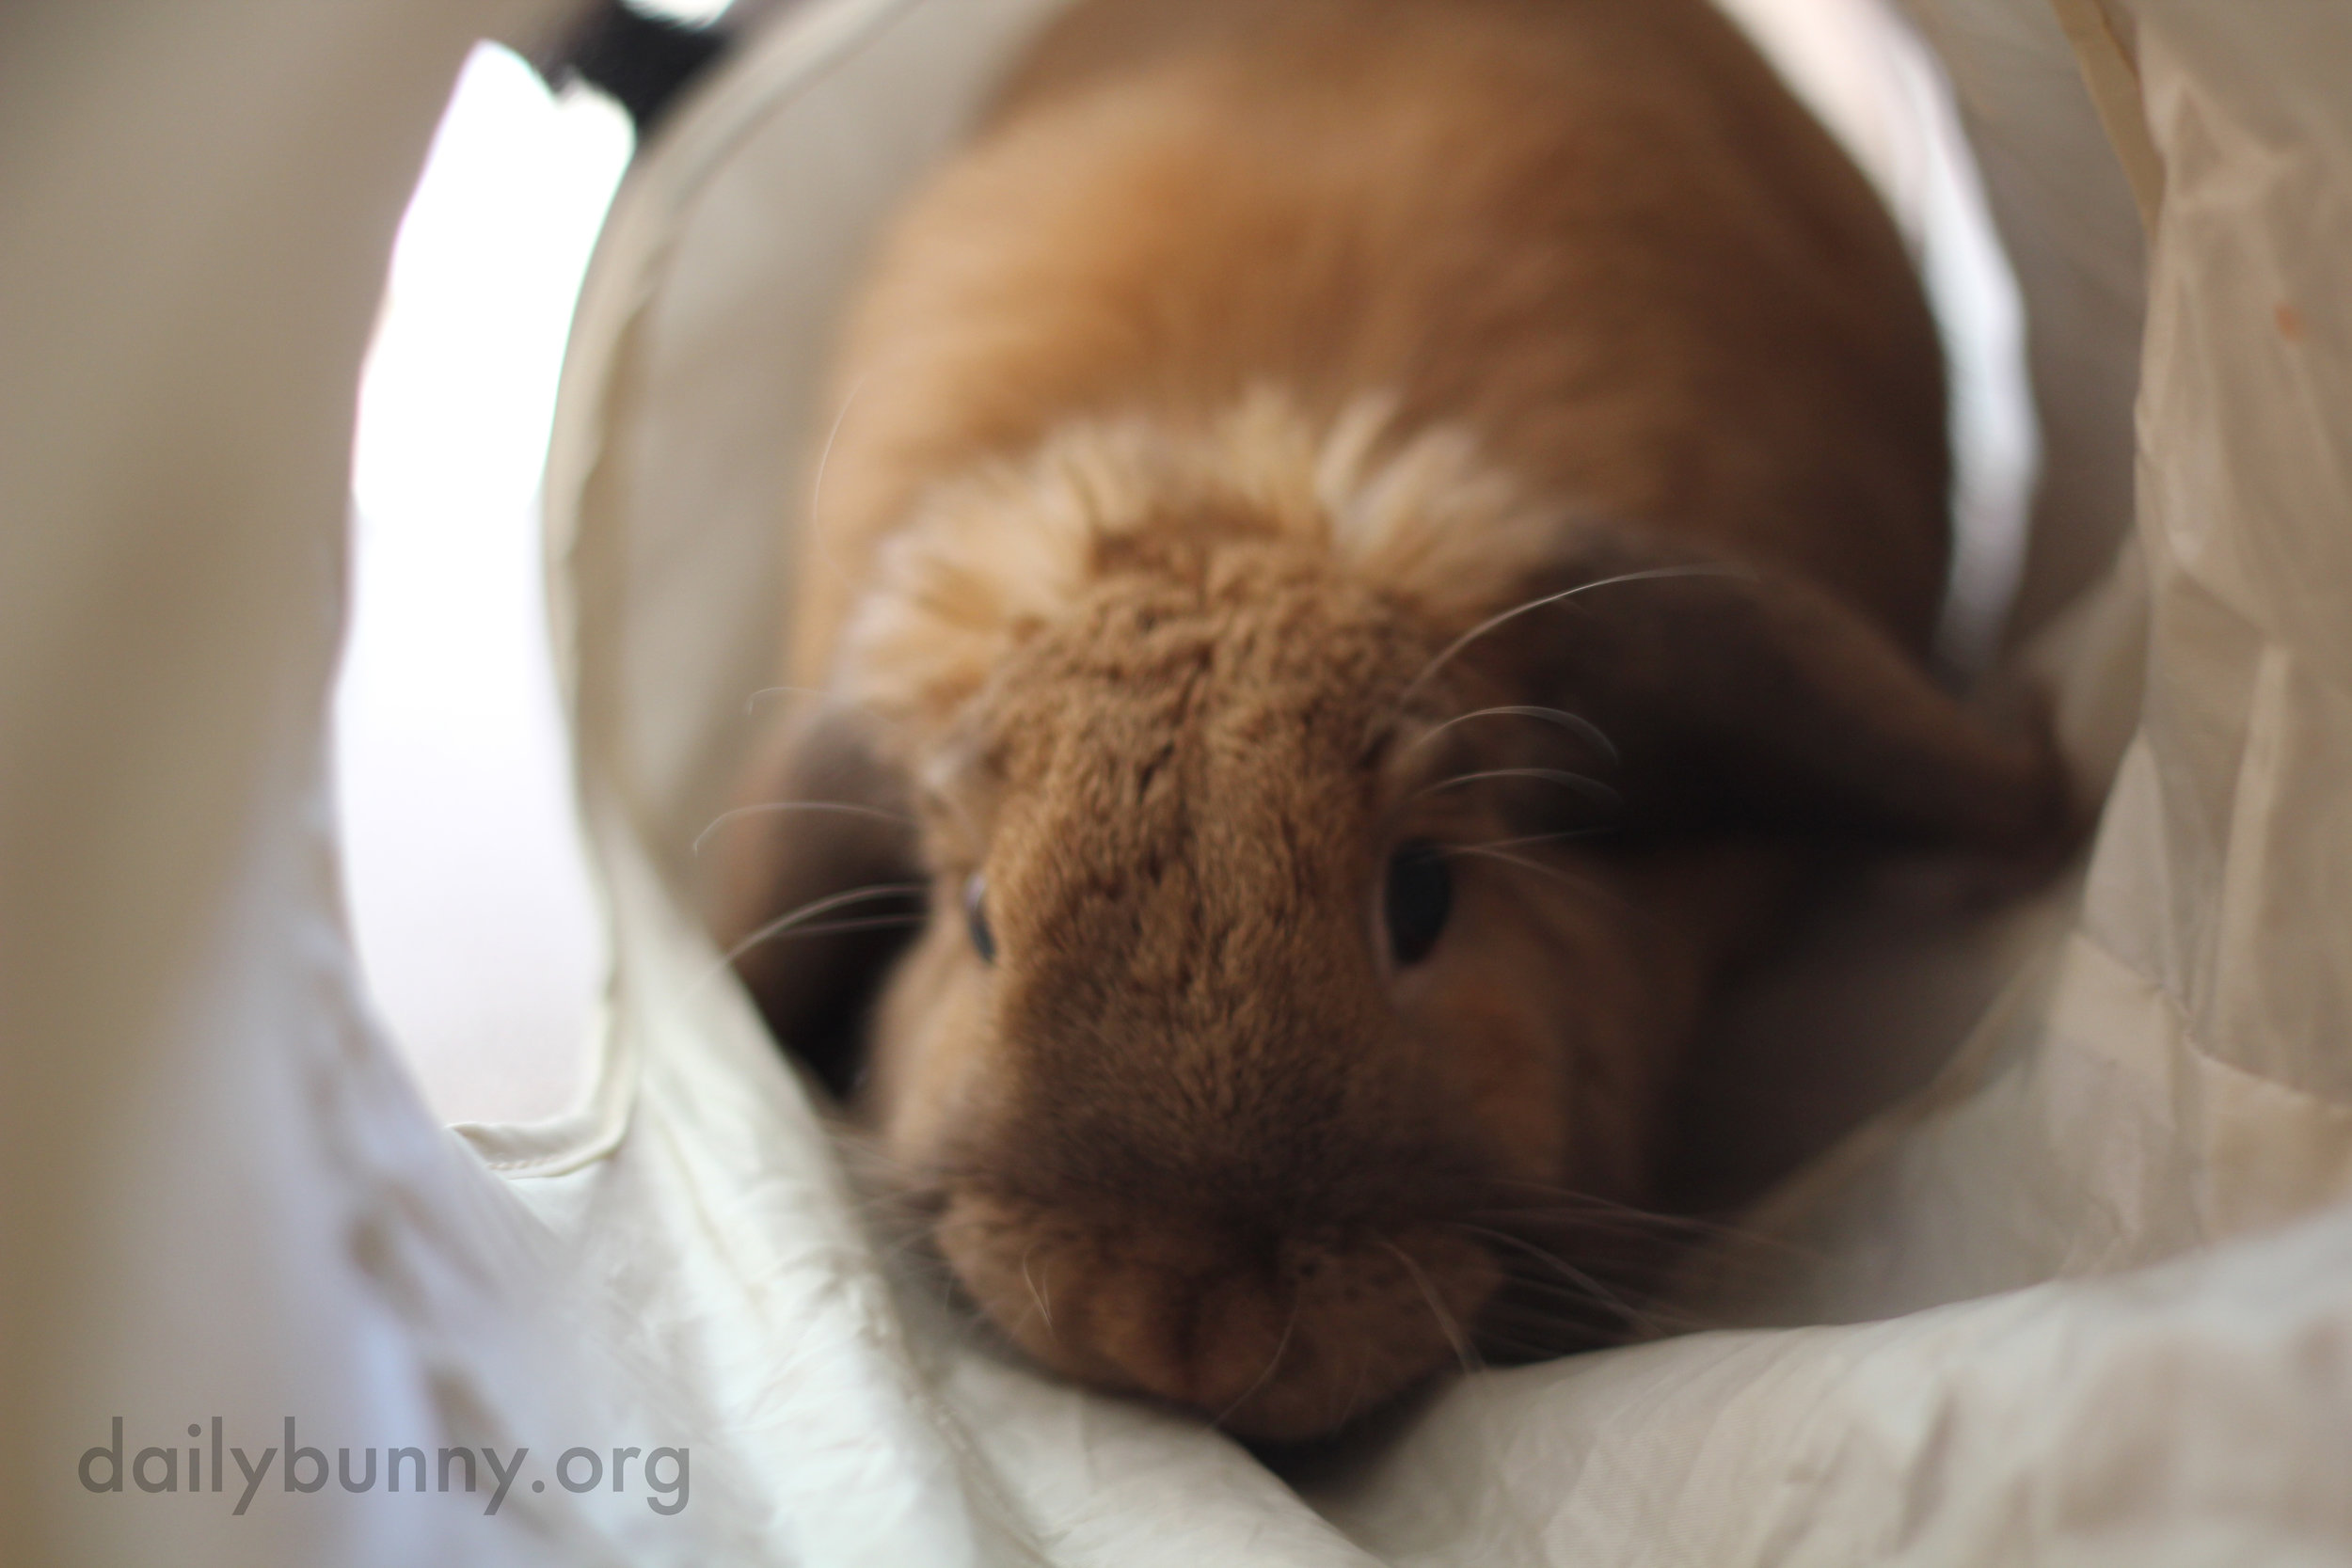 Bunny Will Travel Through Tunnels and Stand Up Tall to Be Near His Human 1